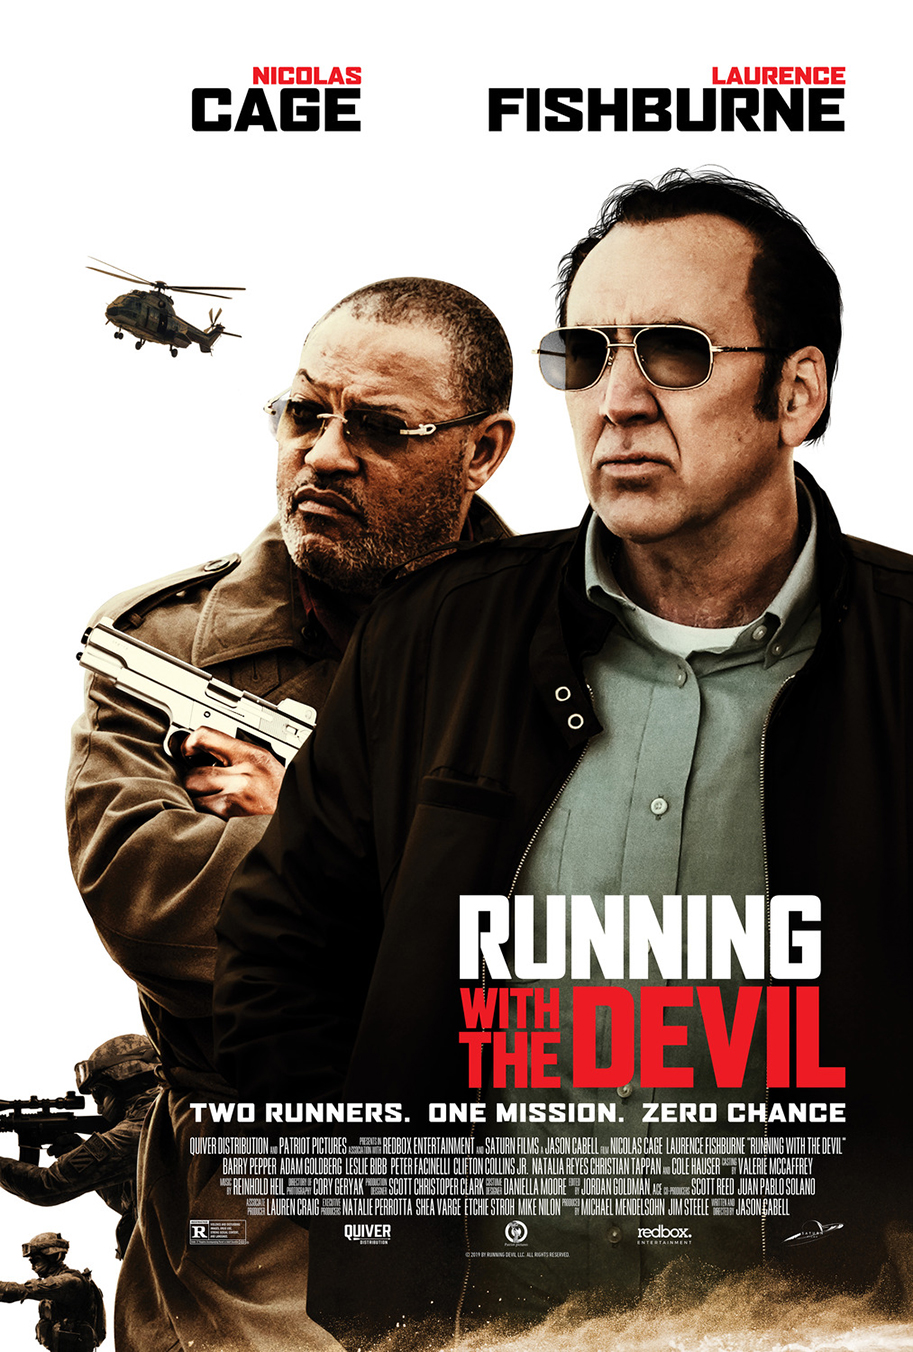 Nicolas Cage, Laurence Fishburne, Running with the Devil